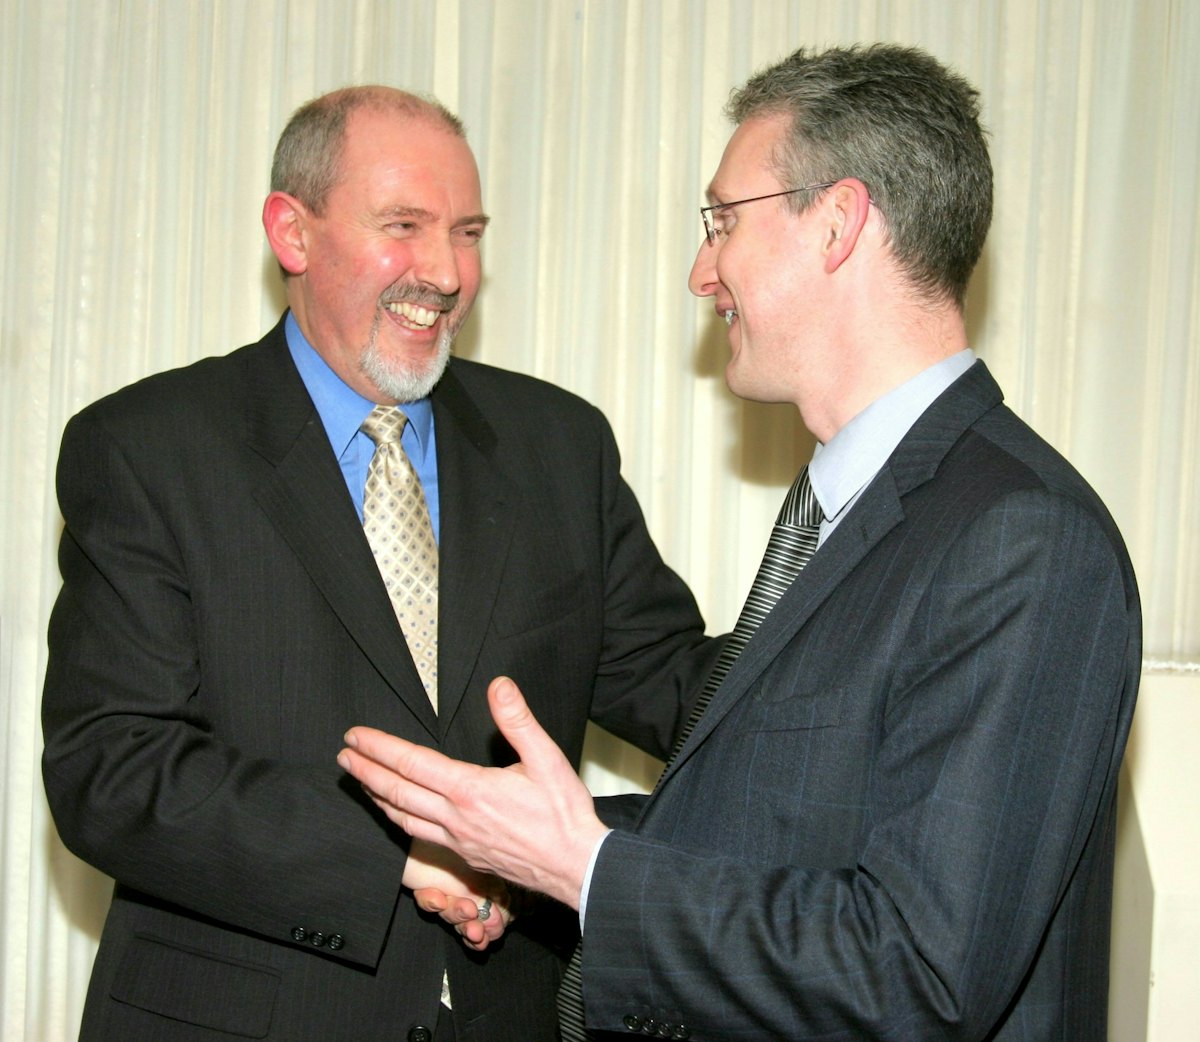 The secretary of the National Spiritual Assembly of the Baha'is of the United Kingdom, the Hon. Barney Leith (left), with the chair of the All Party Parliamentary Friends of the Baha'i Faith, Mr. Lembit Opik MP.